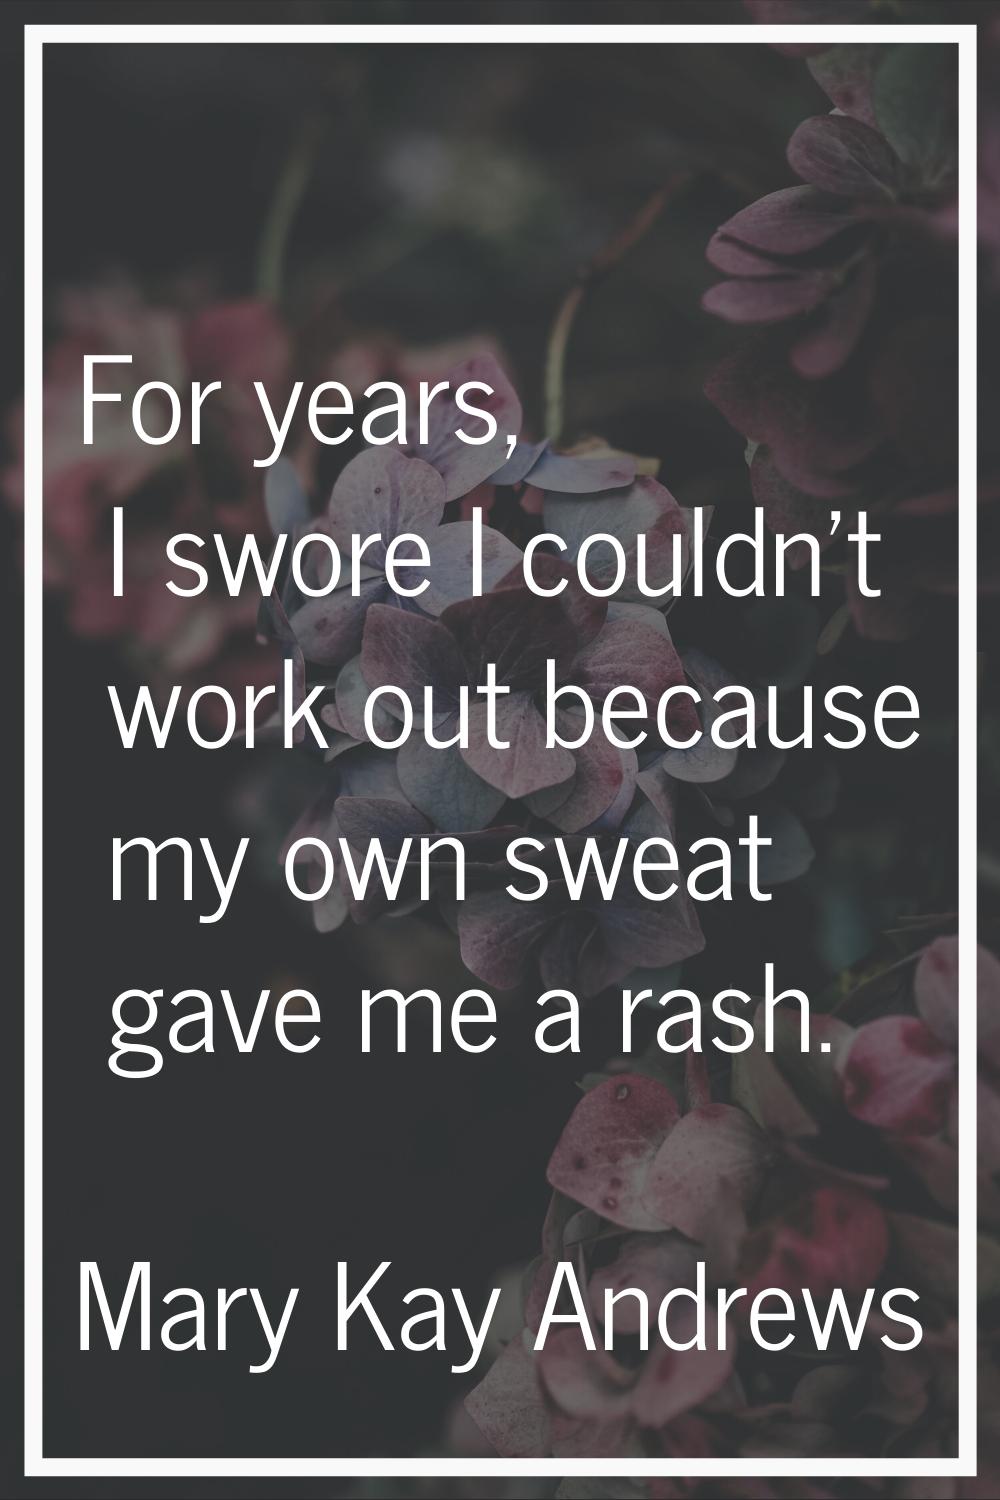 For years, I swore I couldn't work out because my own sweat gave me a rash.